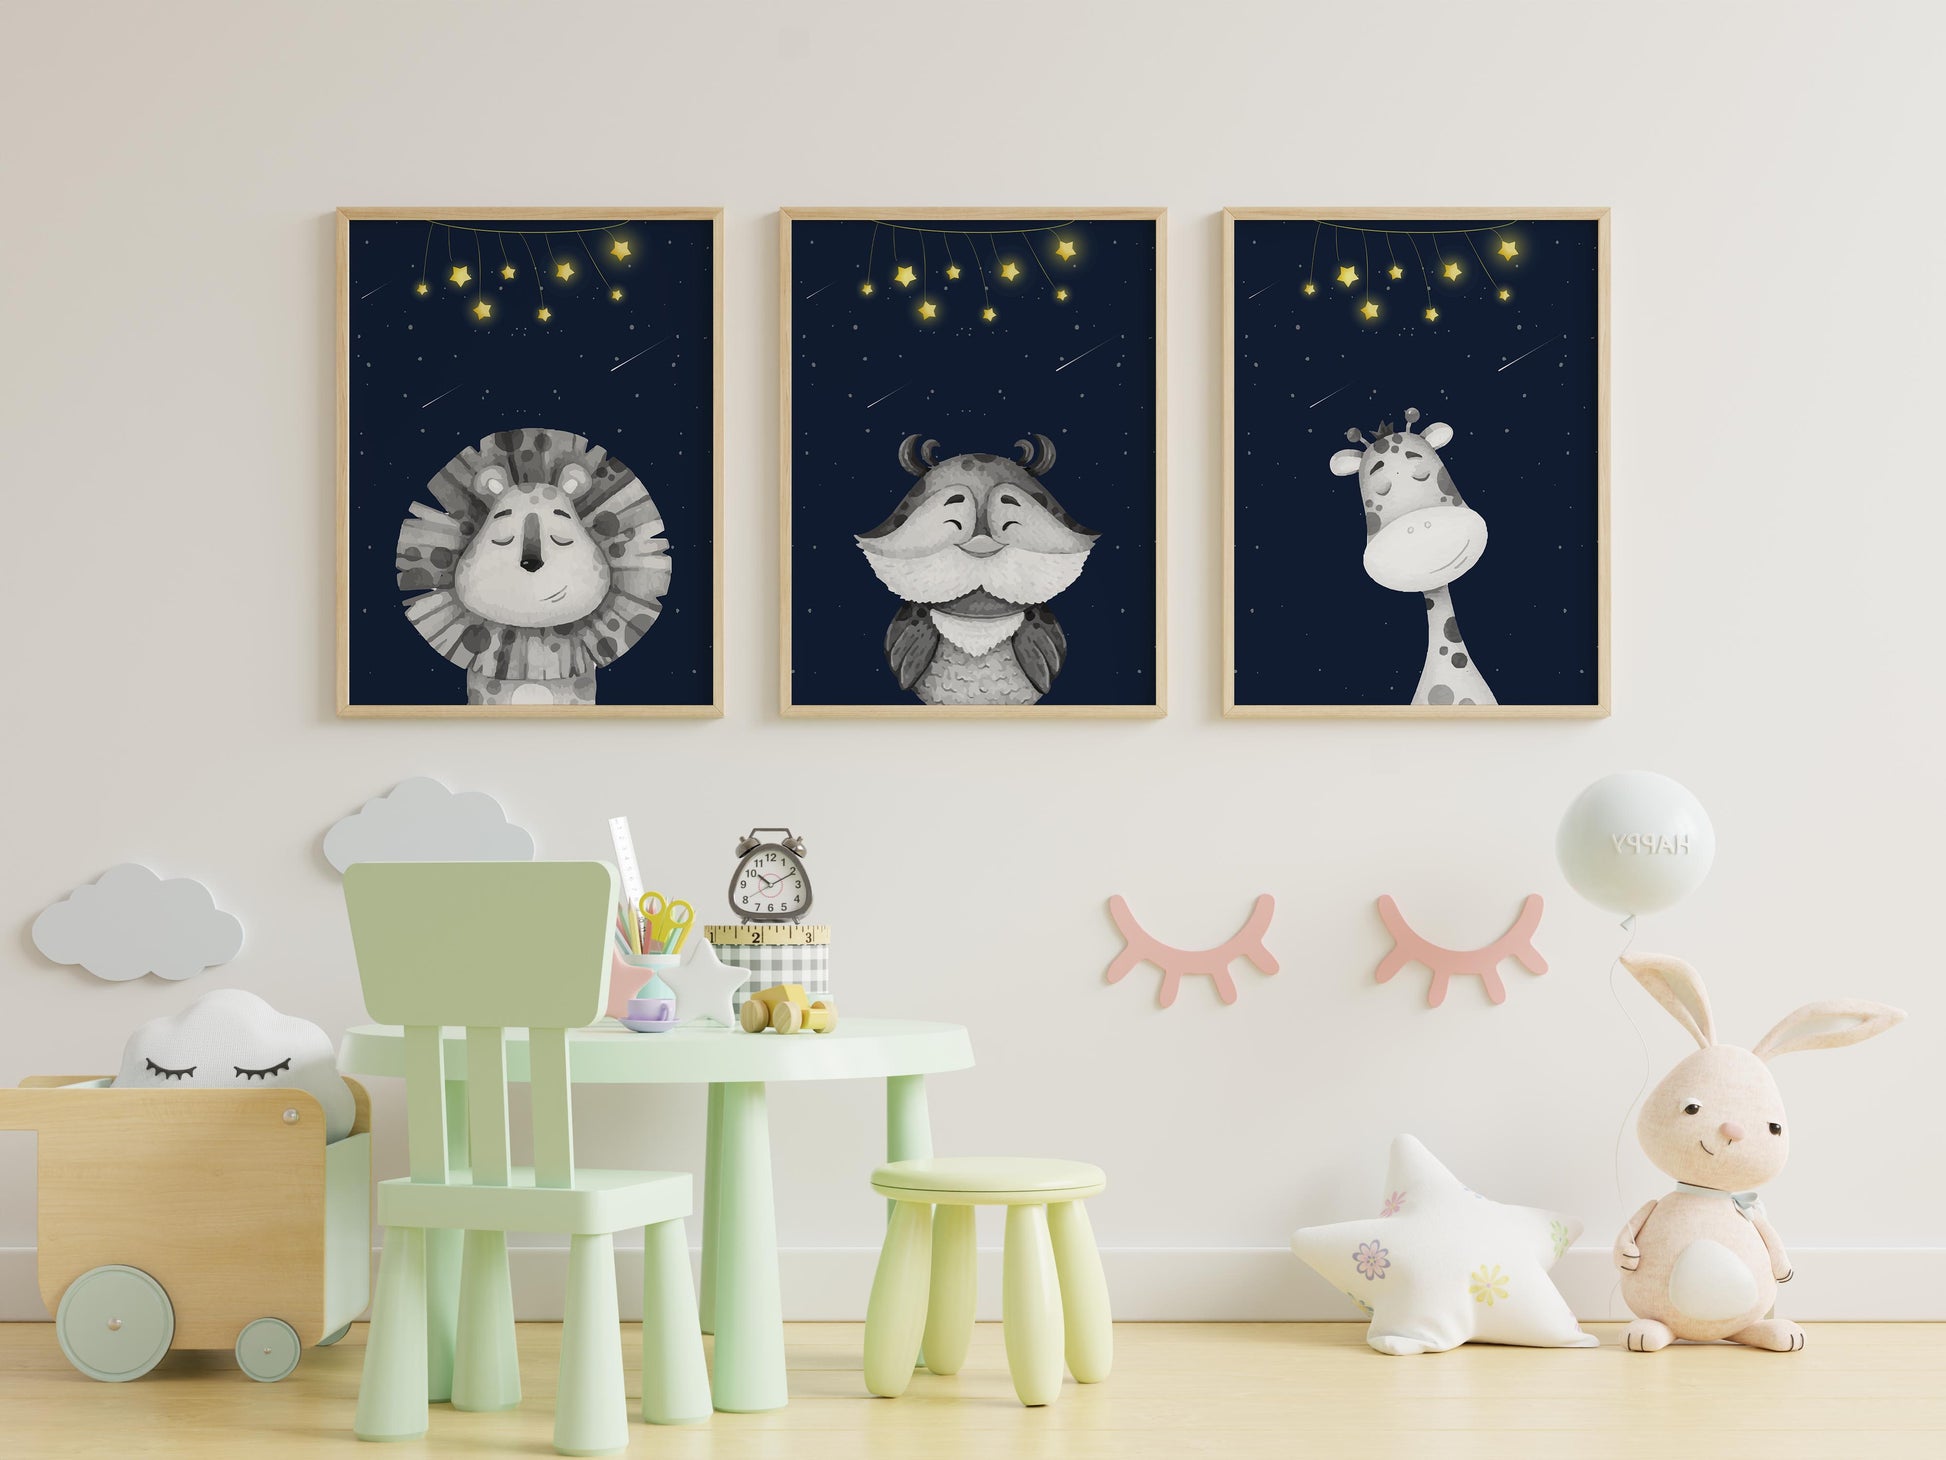 Customized nursery wall art featuring adorable baby animals.